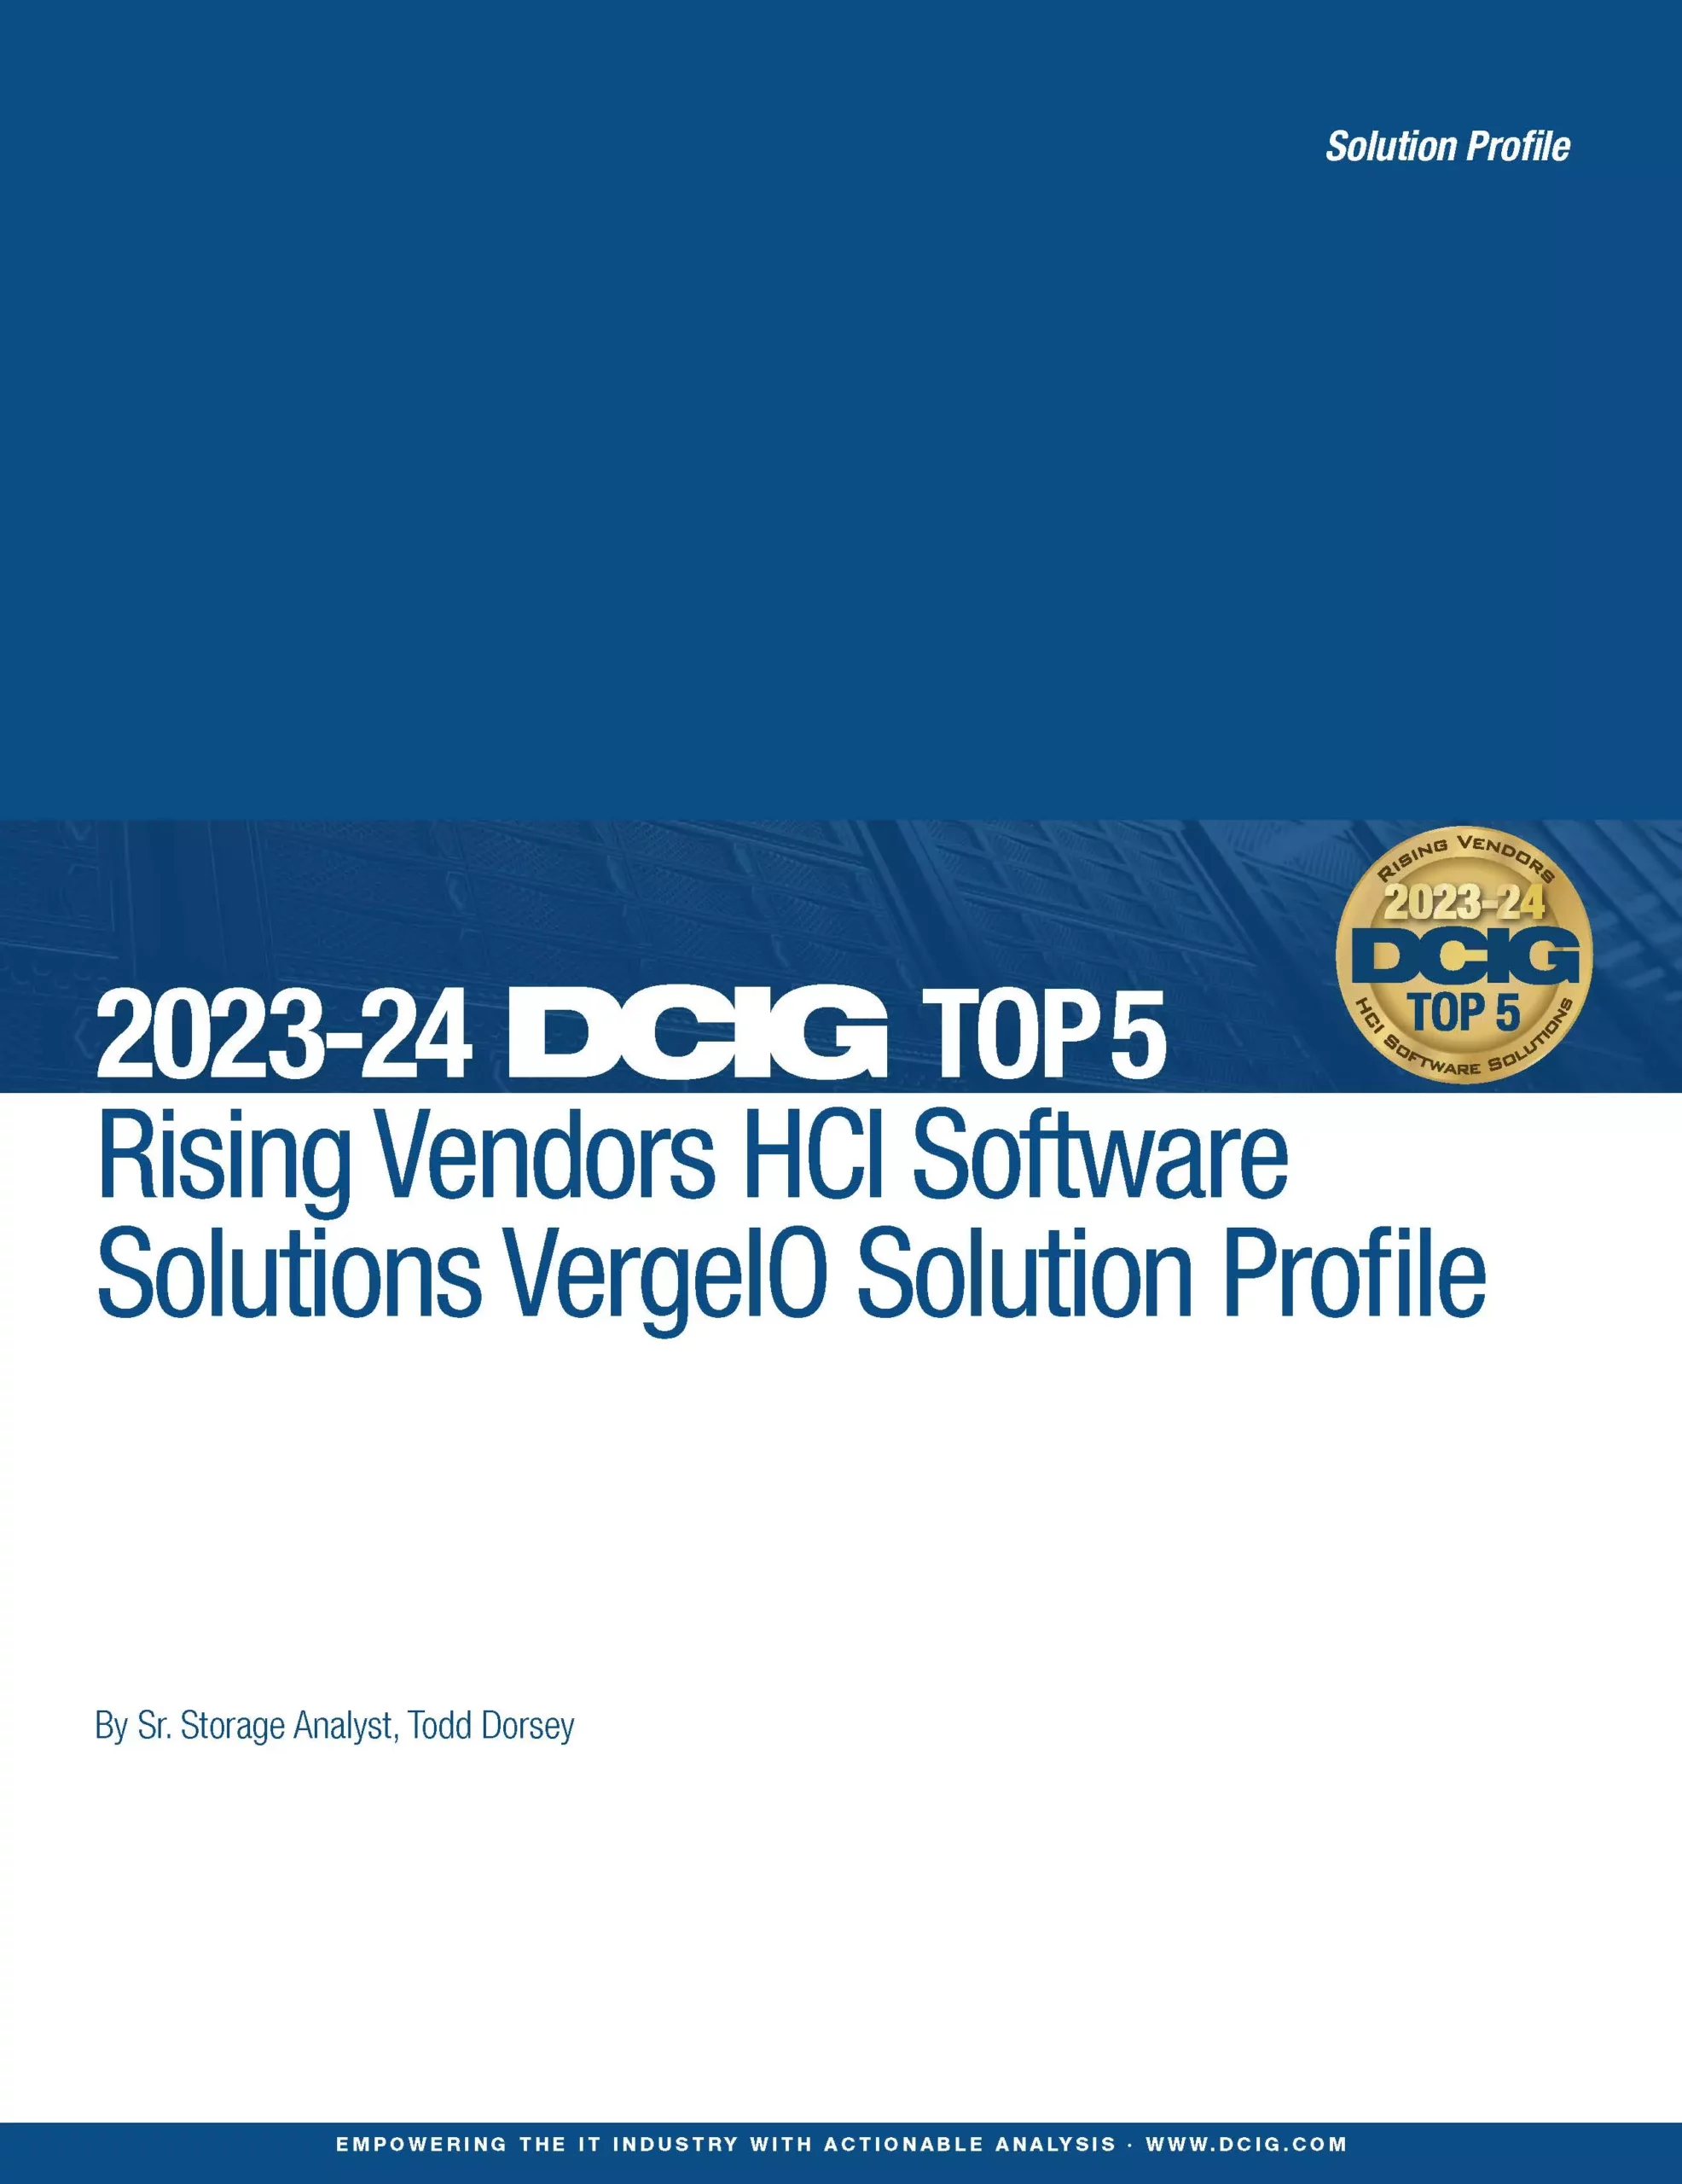 230508 DCIG TOP 5 SOLUTION PROFILE Rising Vendors HCI Software Solutions - VERGEIO (1)[34]_Page_1